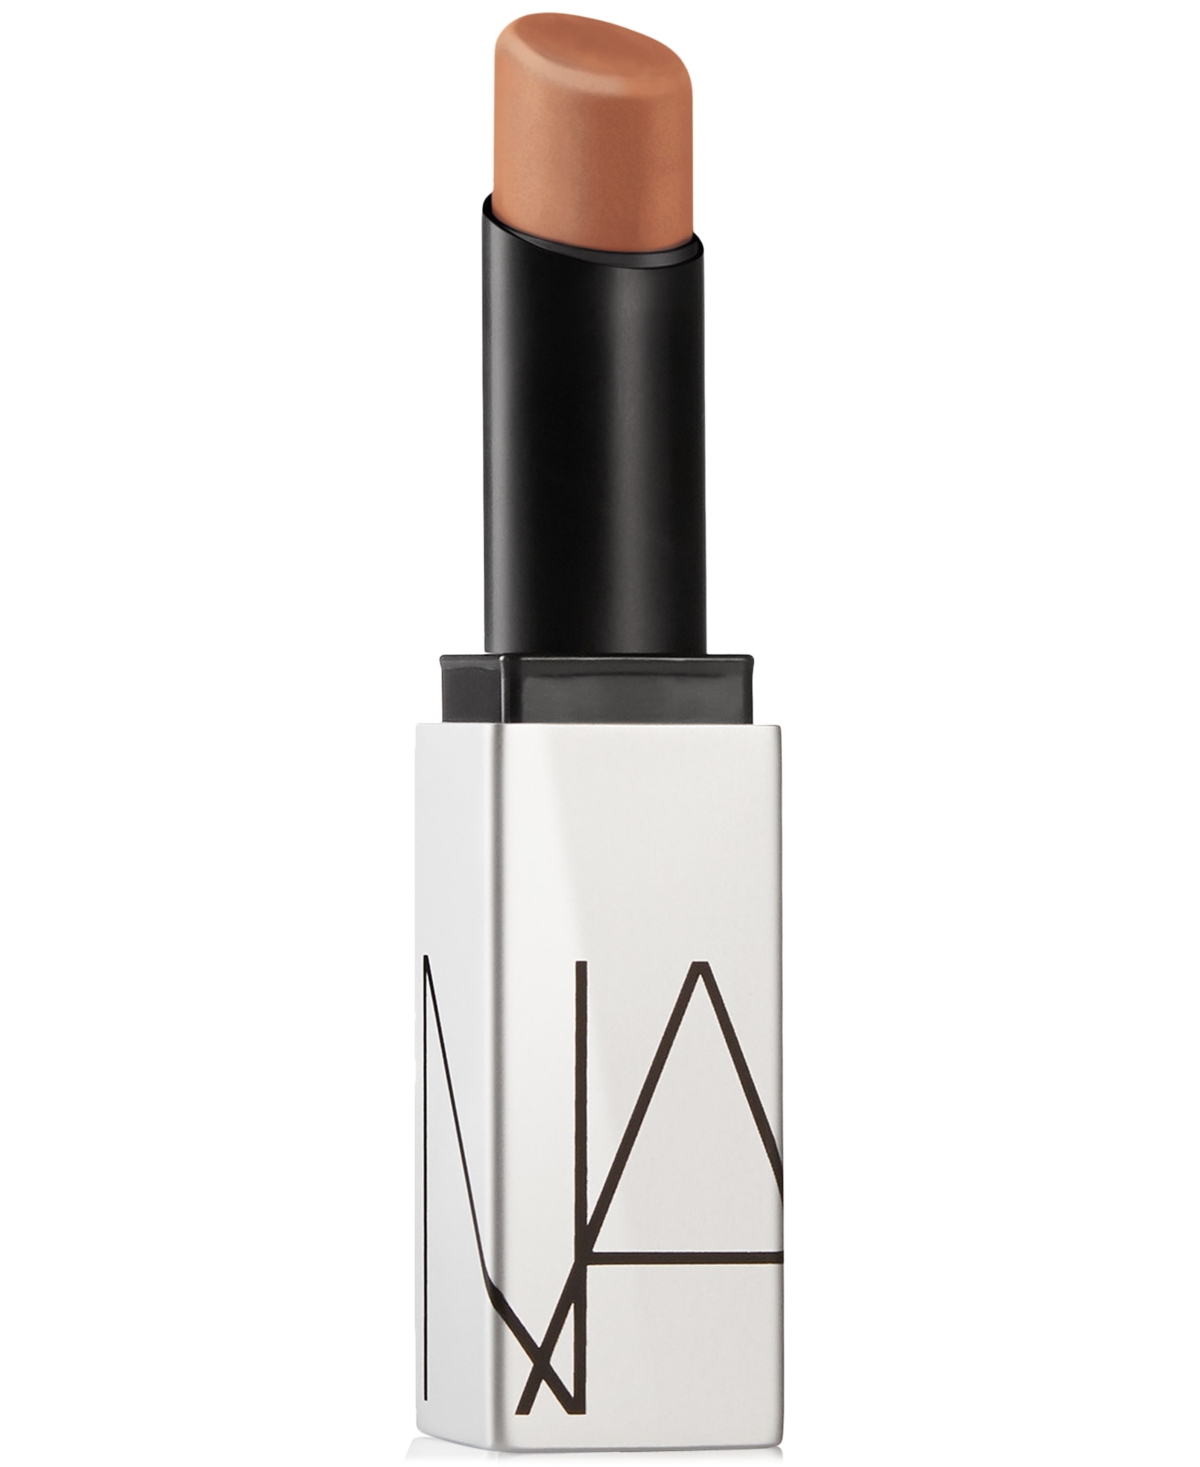 Nars Soft Matte Tinted Lip Balm In Intimate - Beige Nude